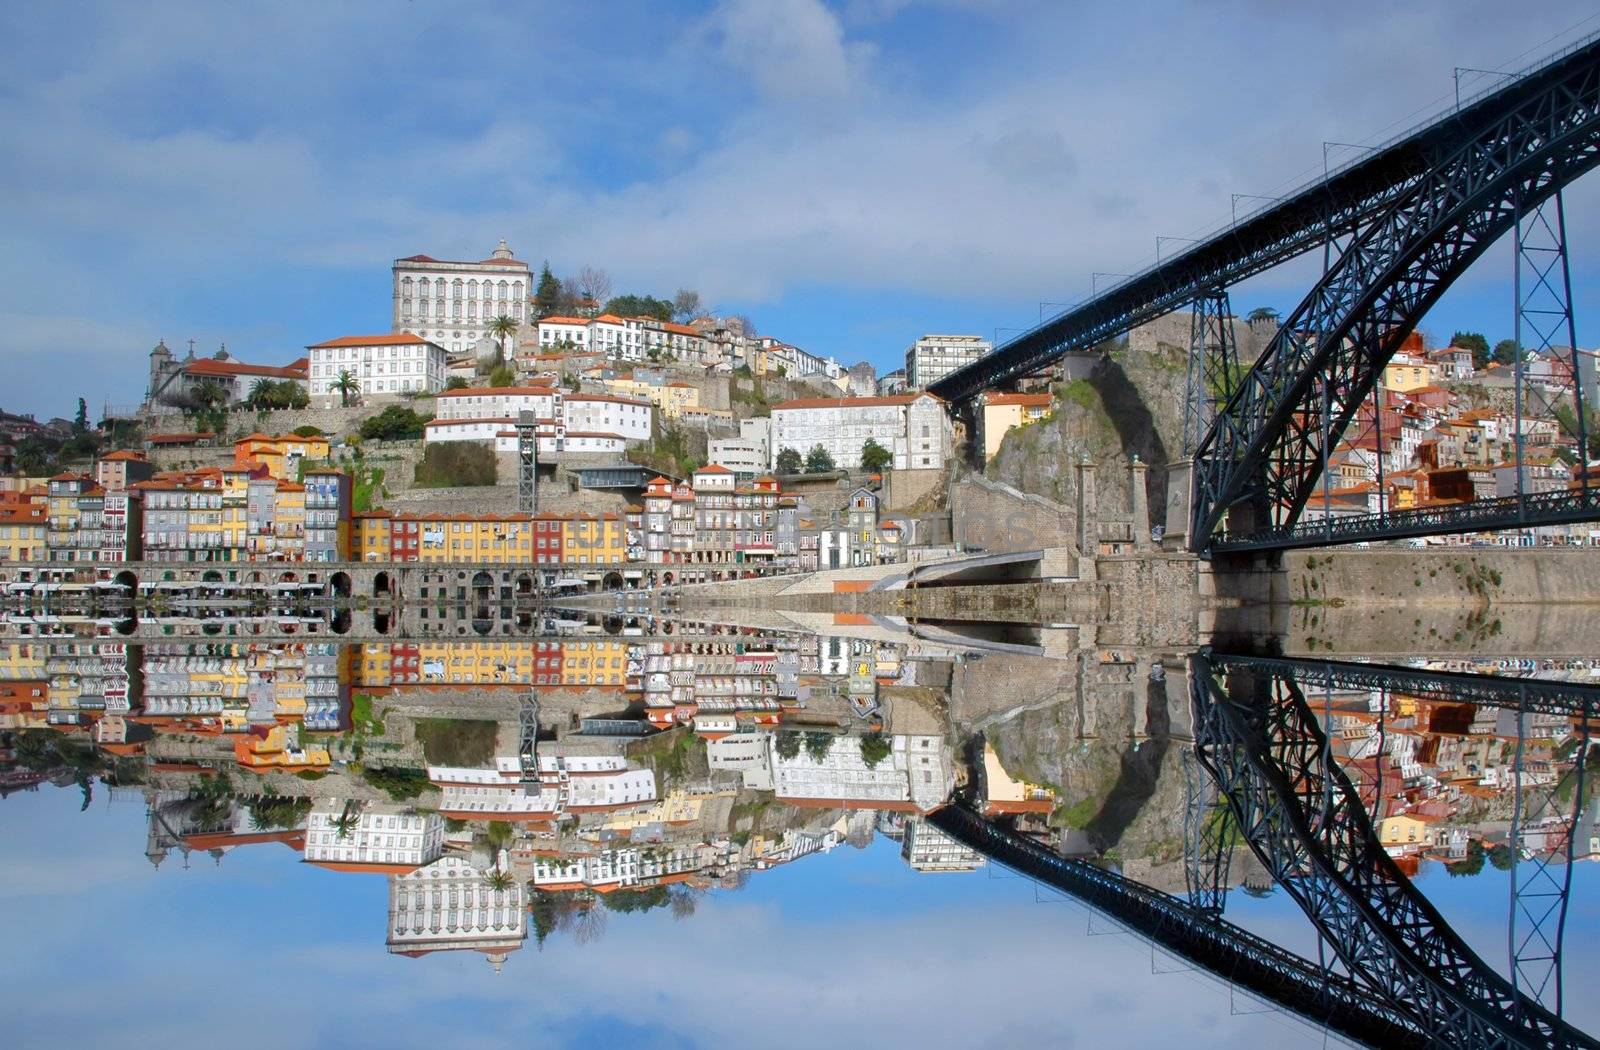 view of the city of Porto next to the Douro river City of the Port wine.